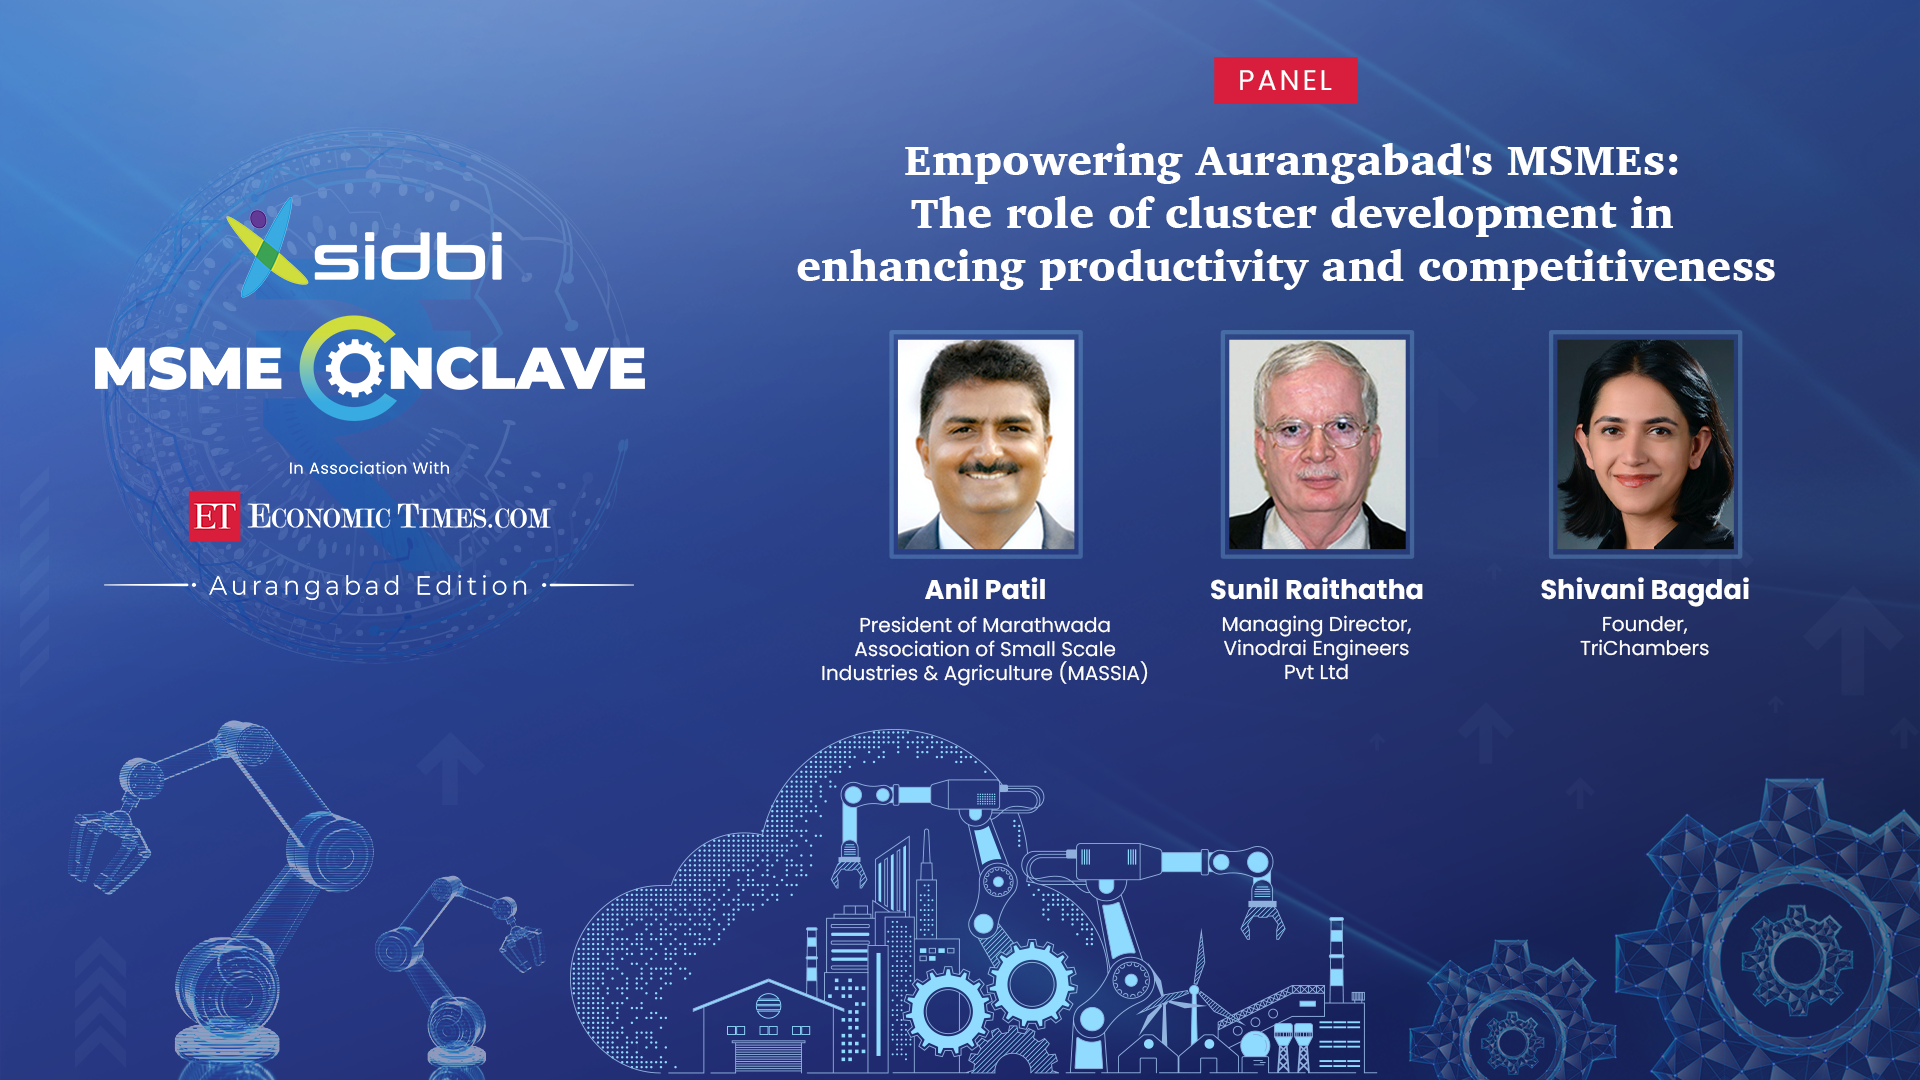 Empowering Aurangabad's MSMEs: The role of cluster development in enhancing productivity and competitiveness